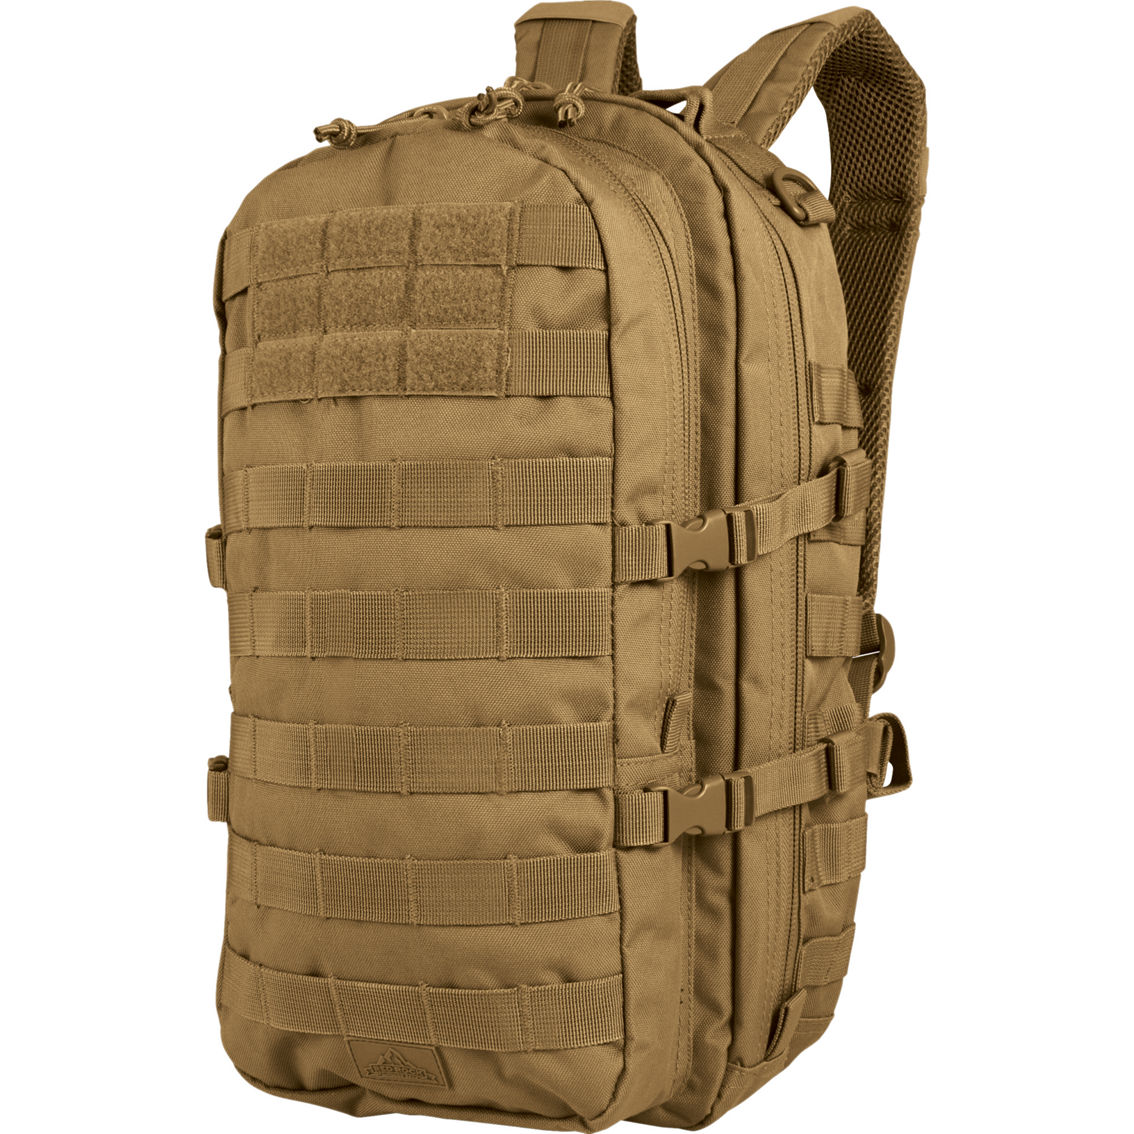 Red Rock Outdoor Gear Element Daypack - Image 2 of 8